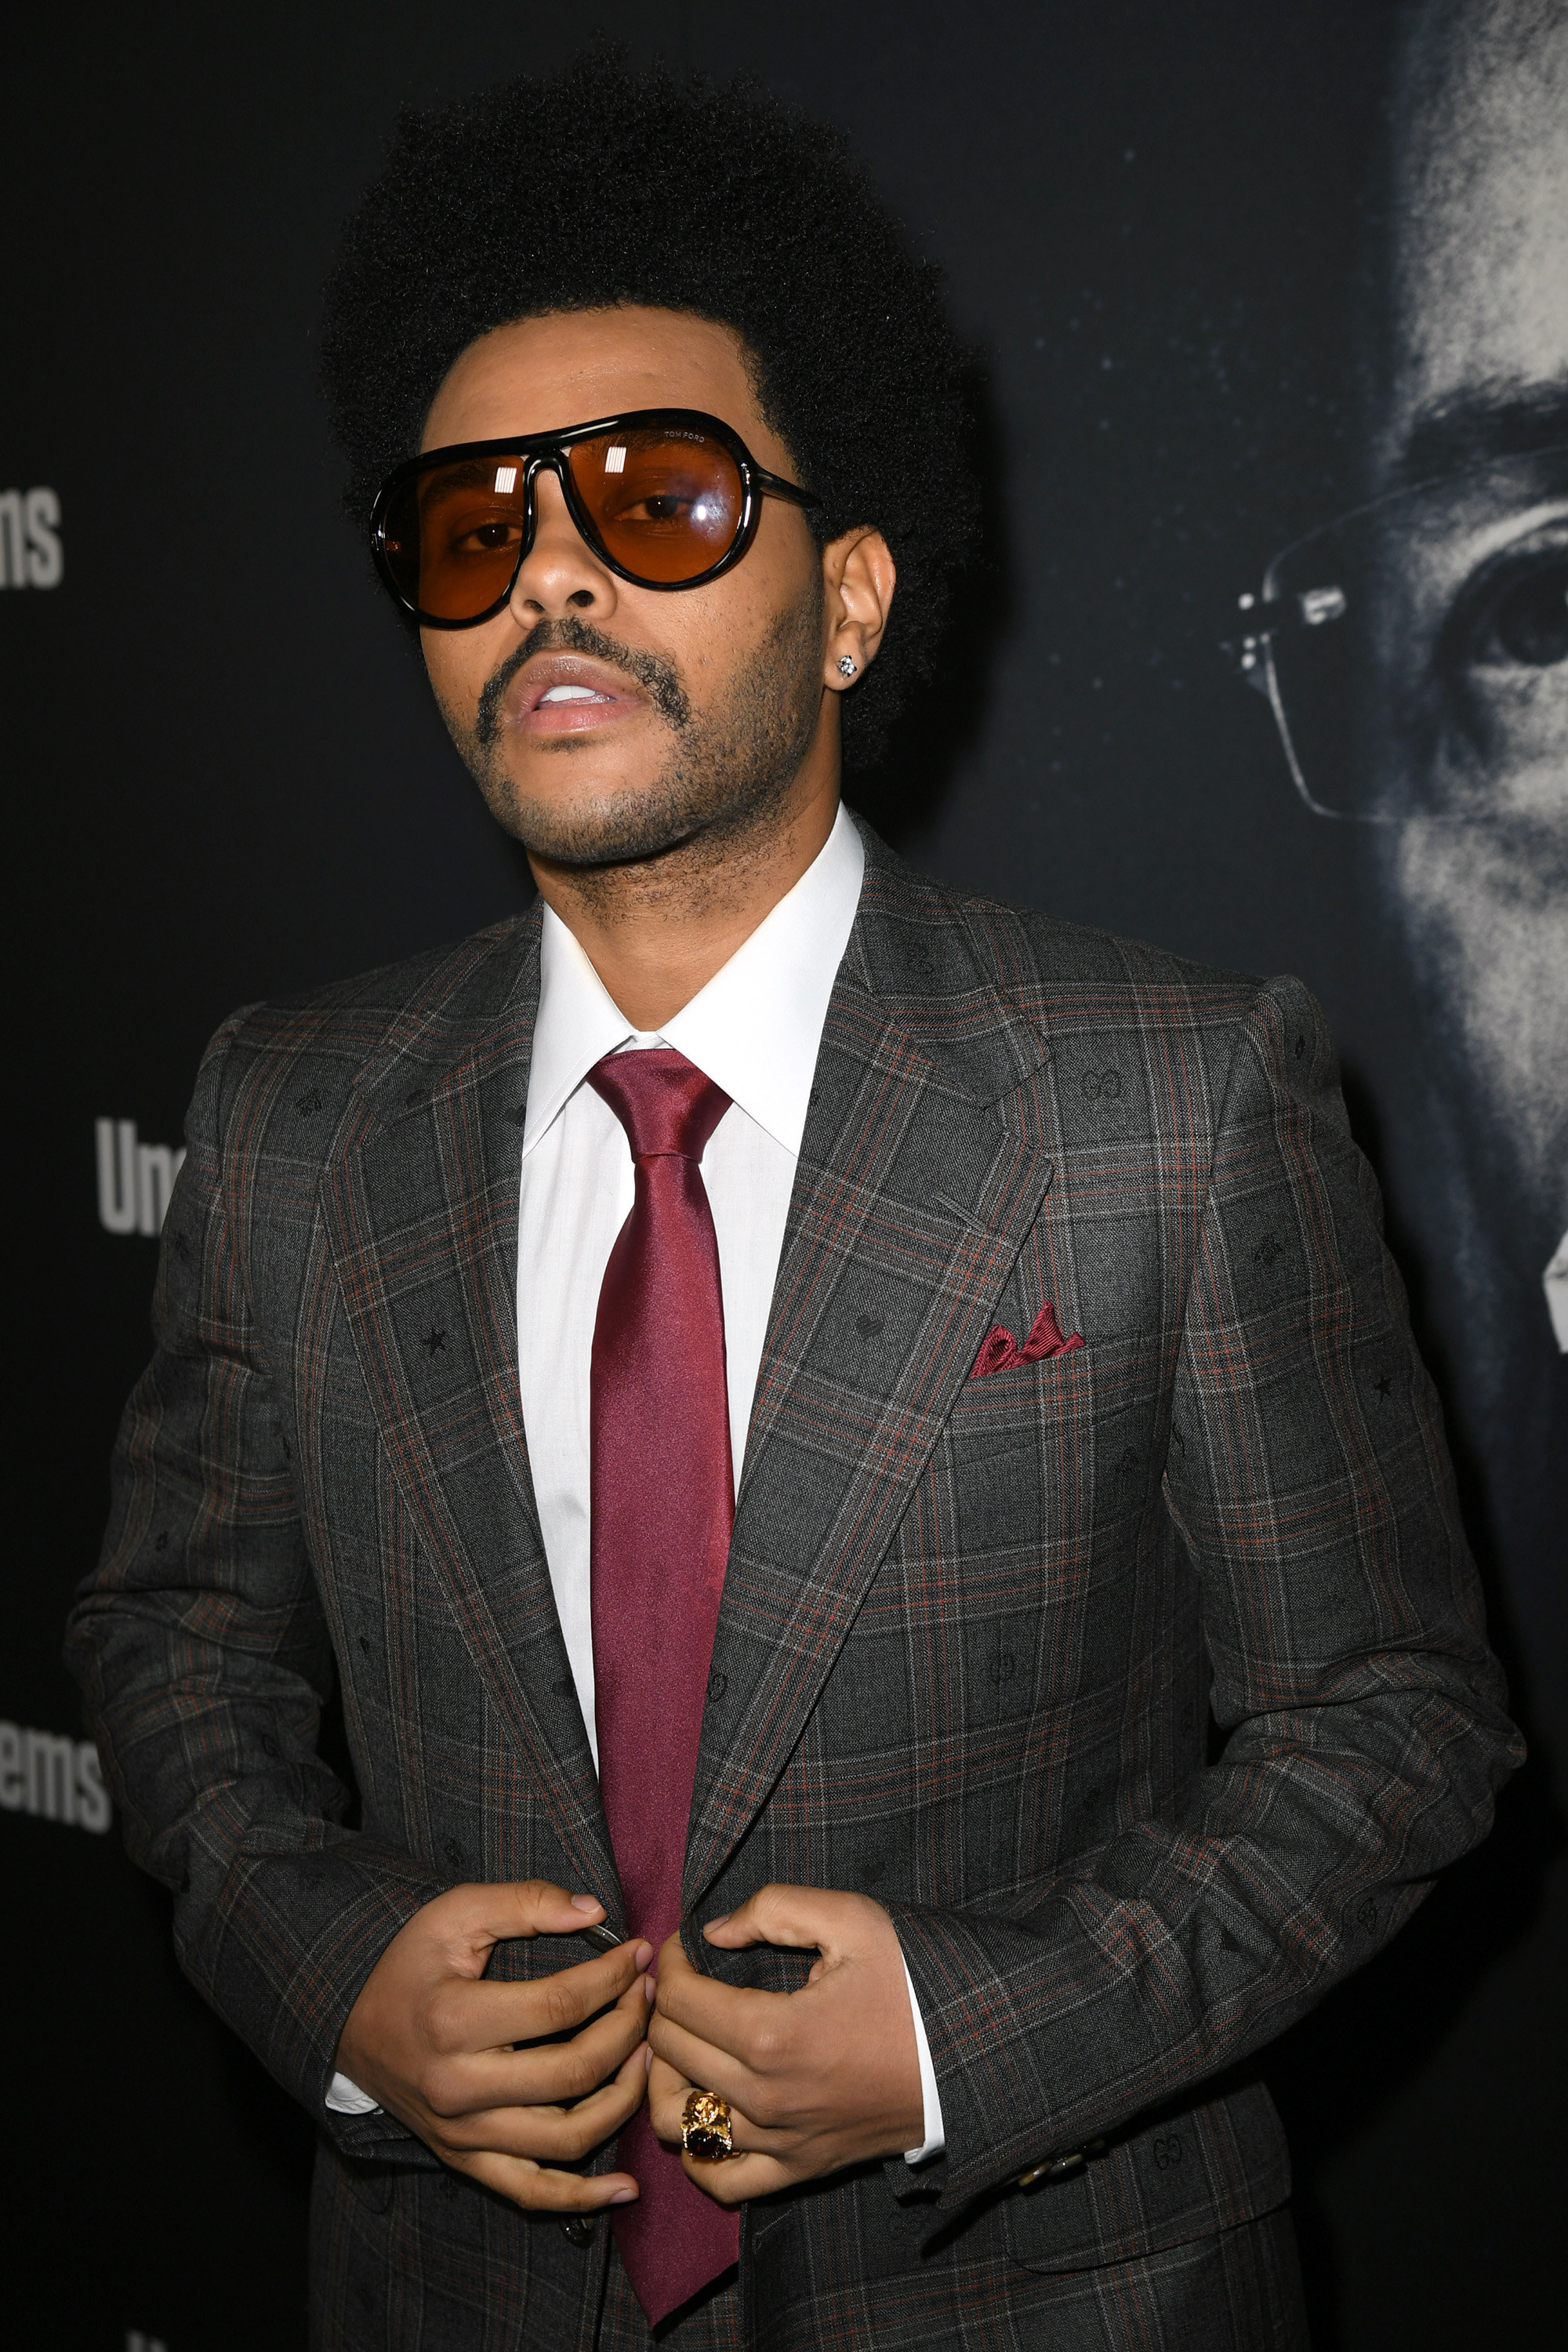 Close-up of The Weeknd in a suit and tie and sunglasses